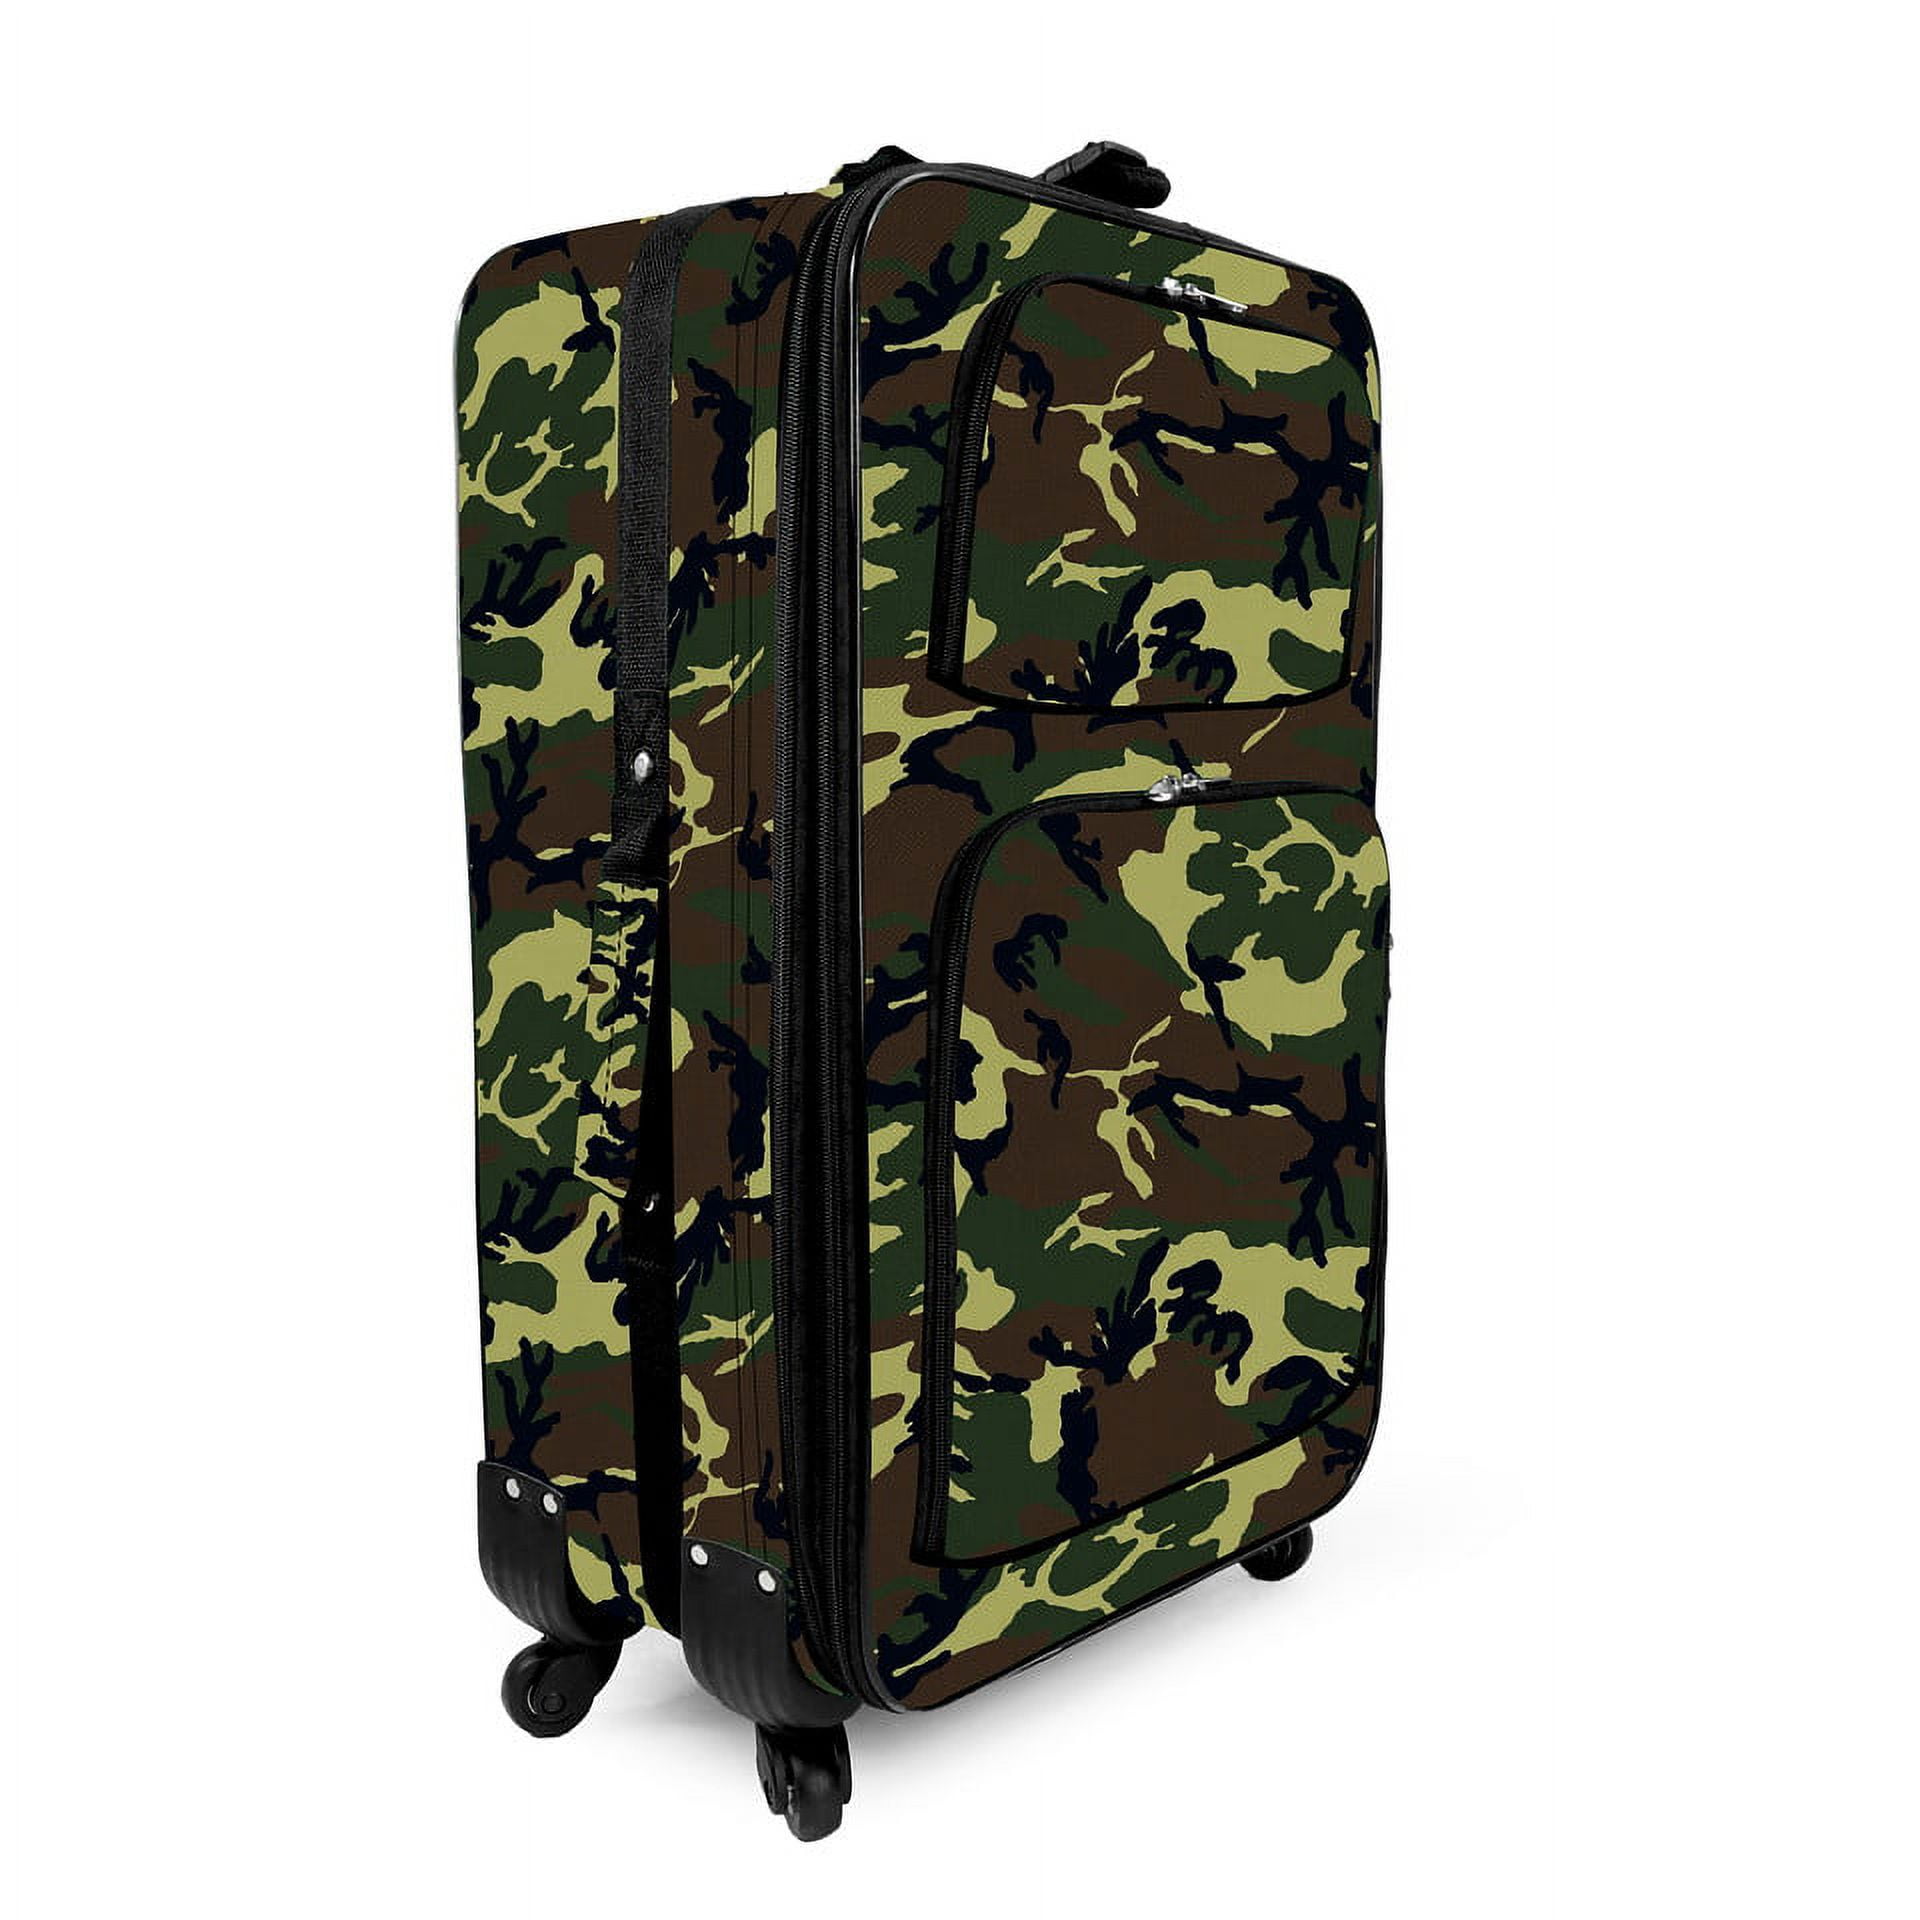 Set of 2 suitcases Midland G9 Pro Camouflage - Black Ops Coffee